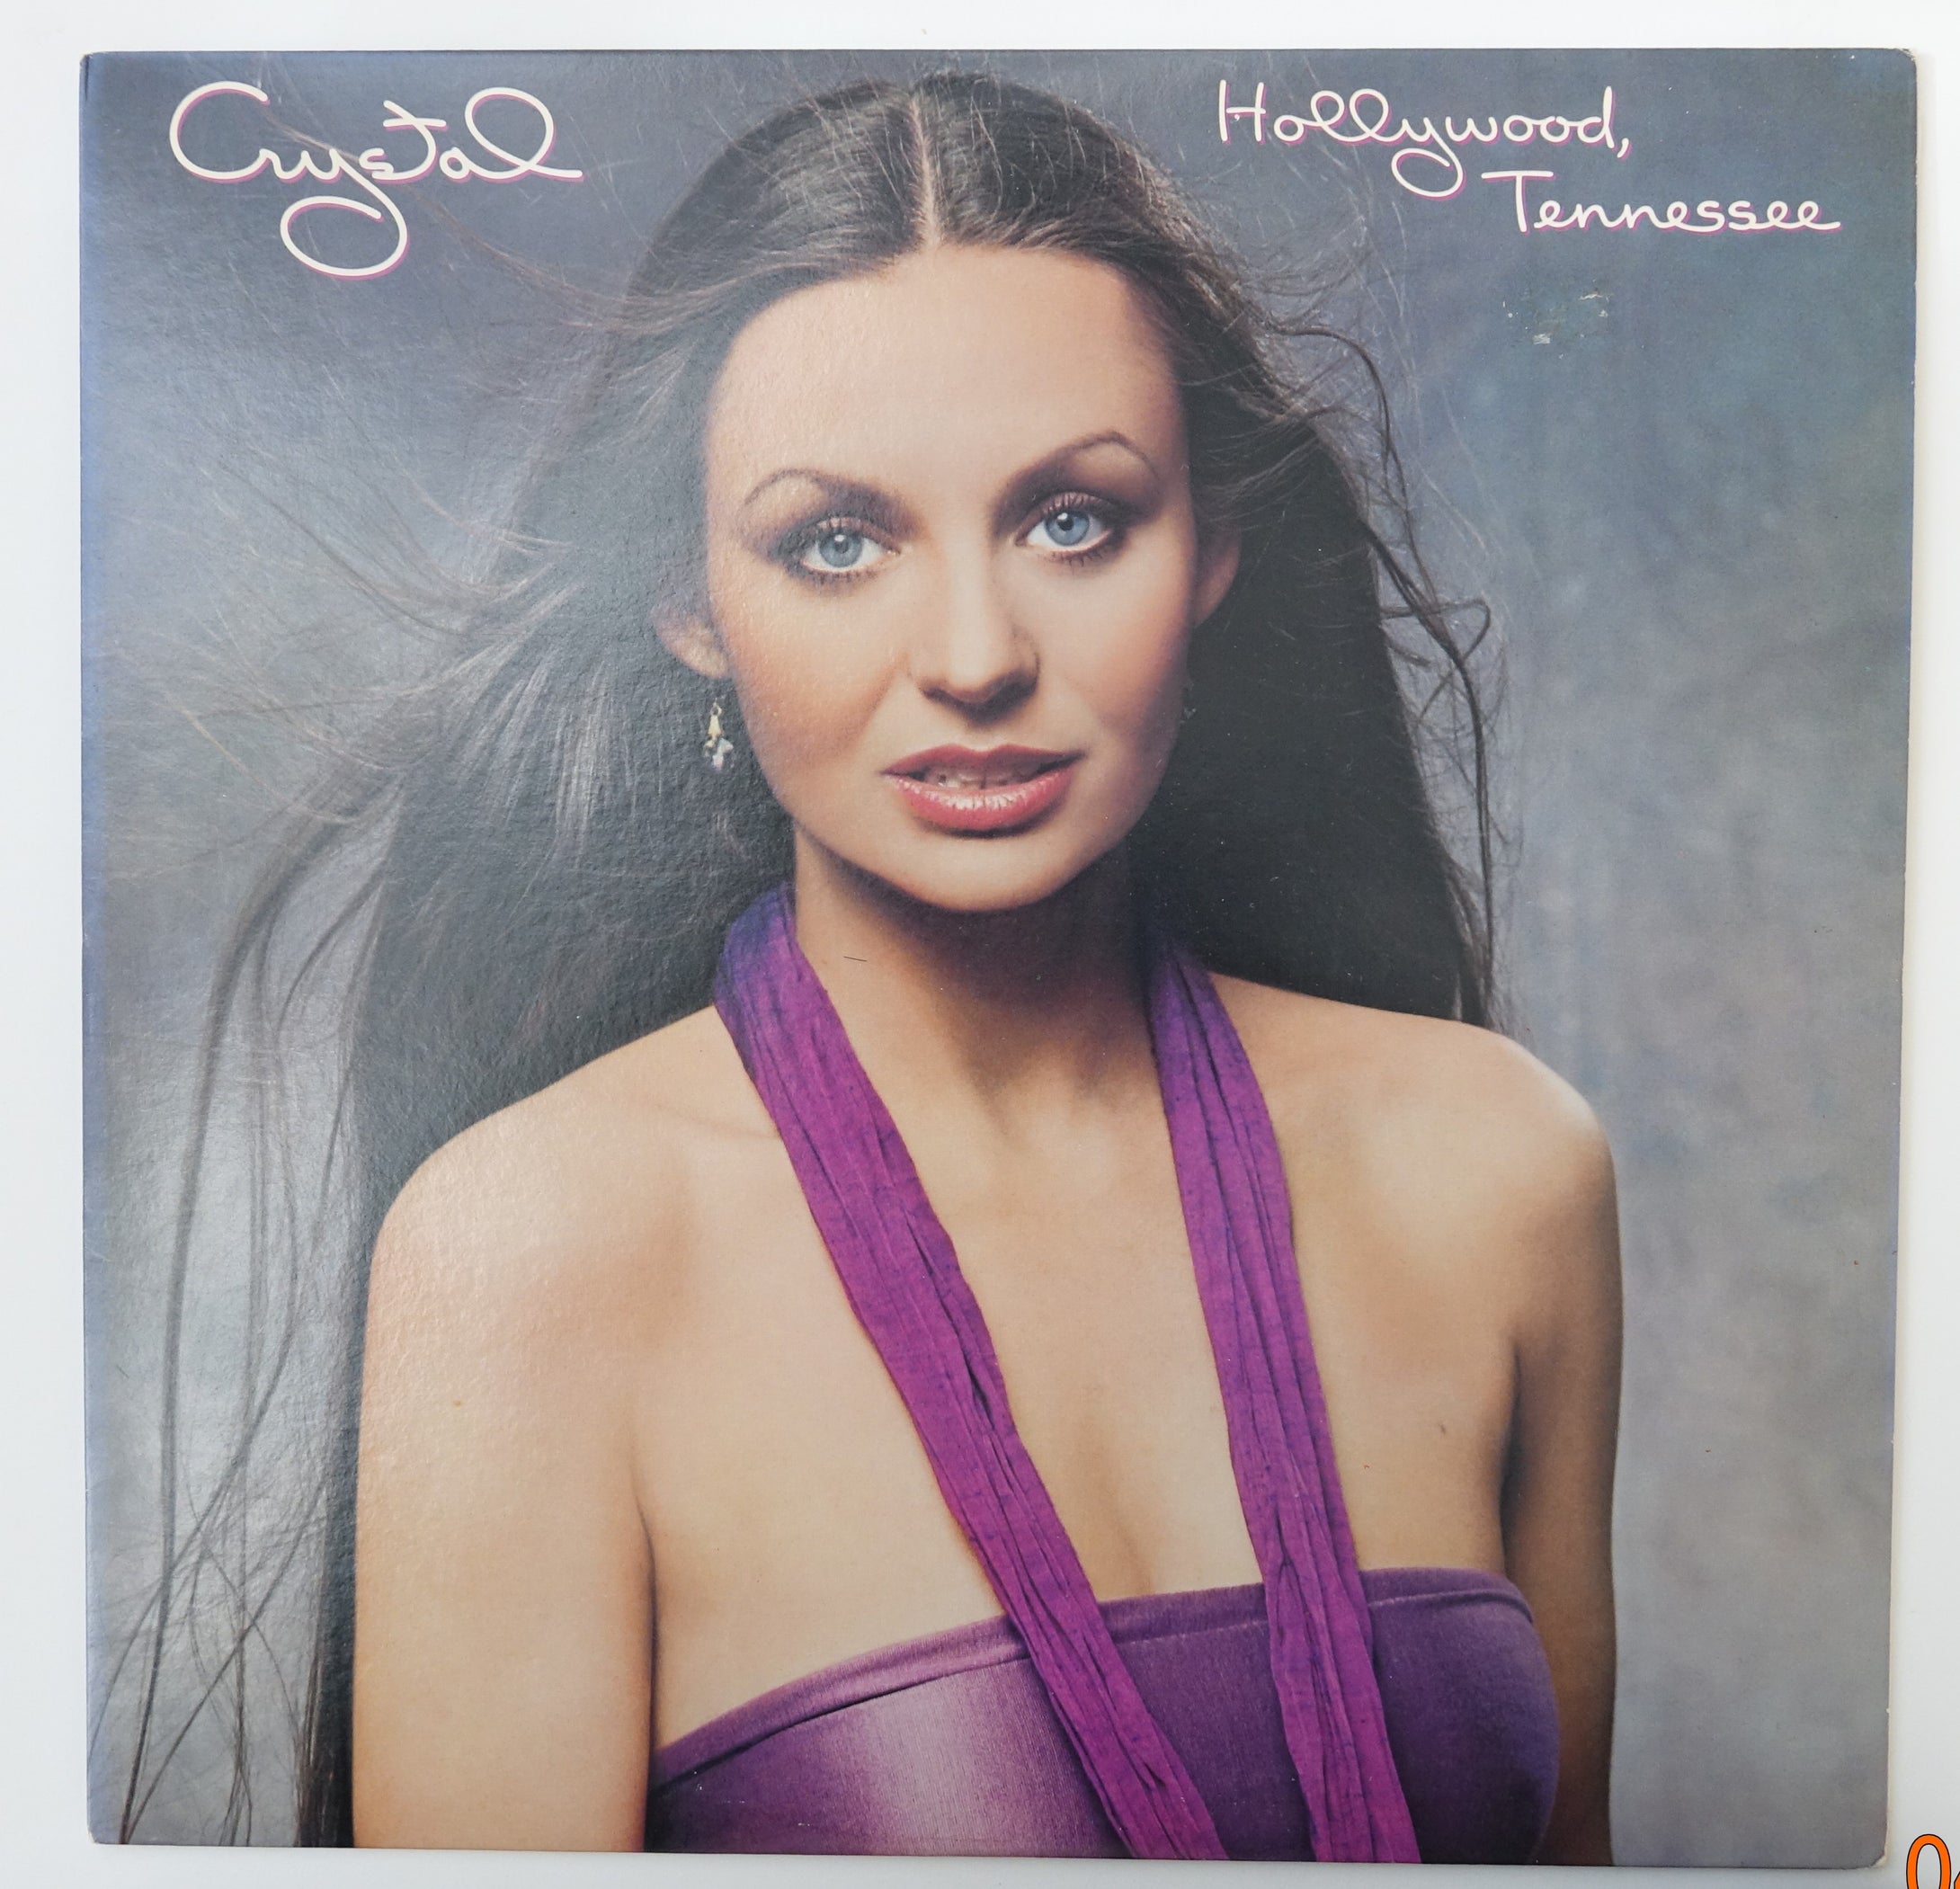 COL007: Crystal Gayle - Hollywood Tennessee